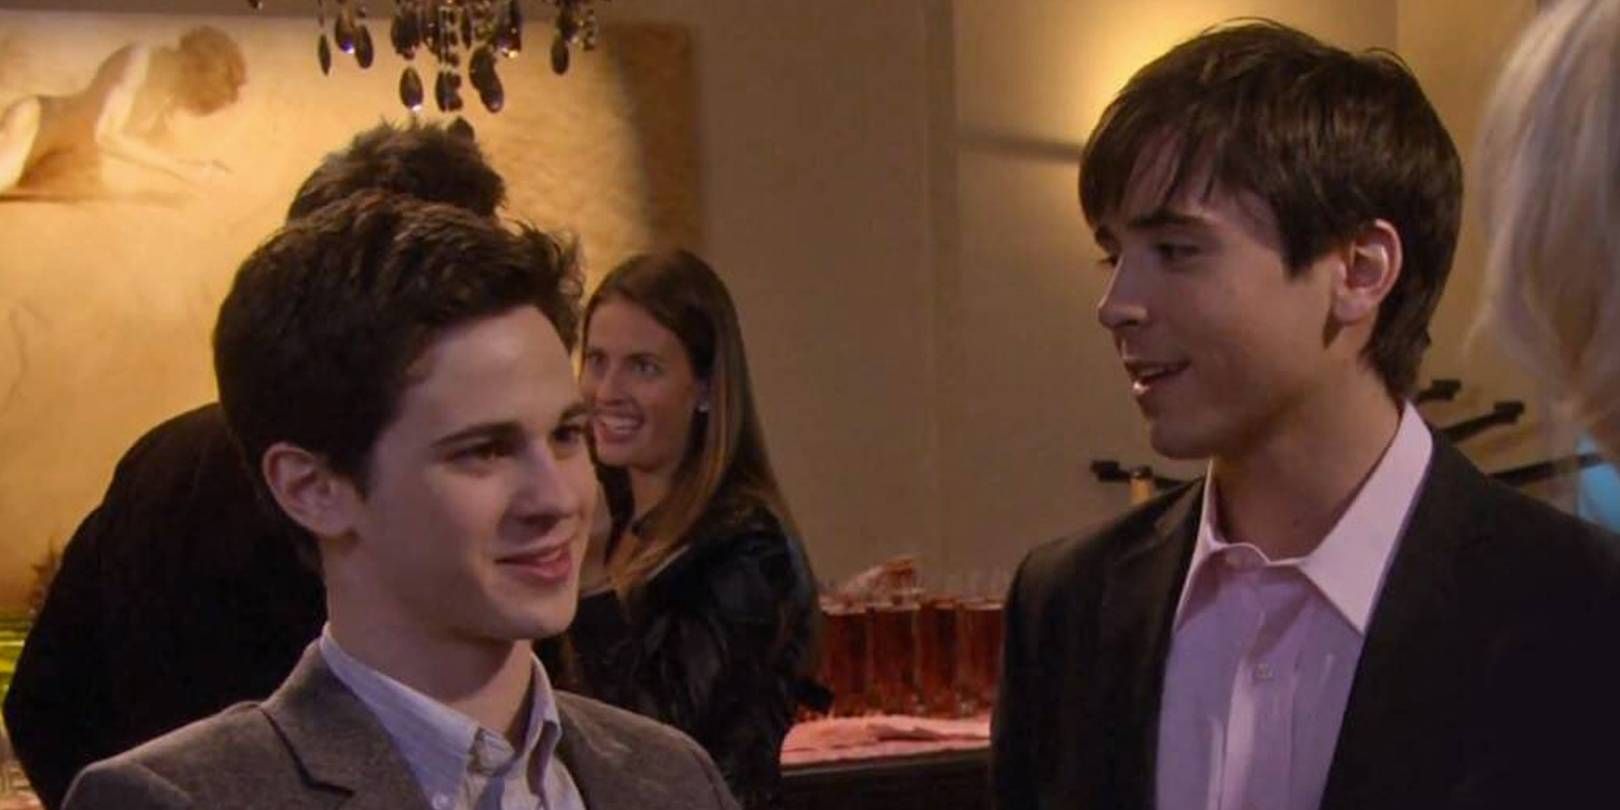 Eric and Jonathan at the Constance graduation party in Gossip Girl